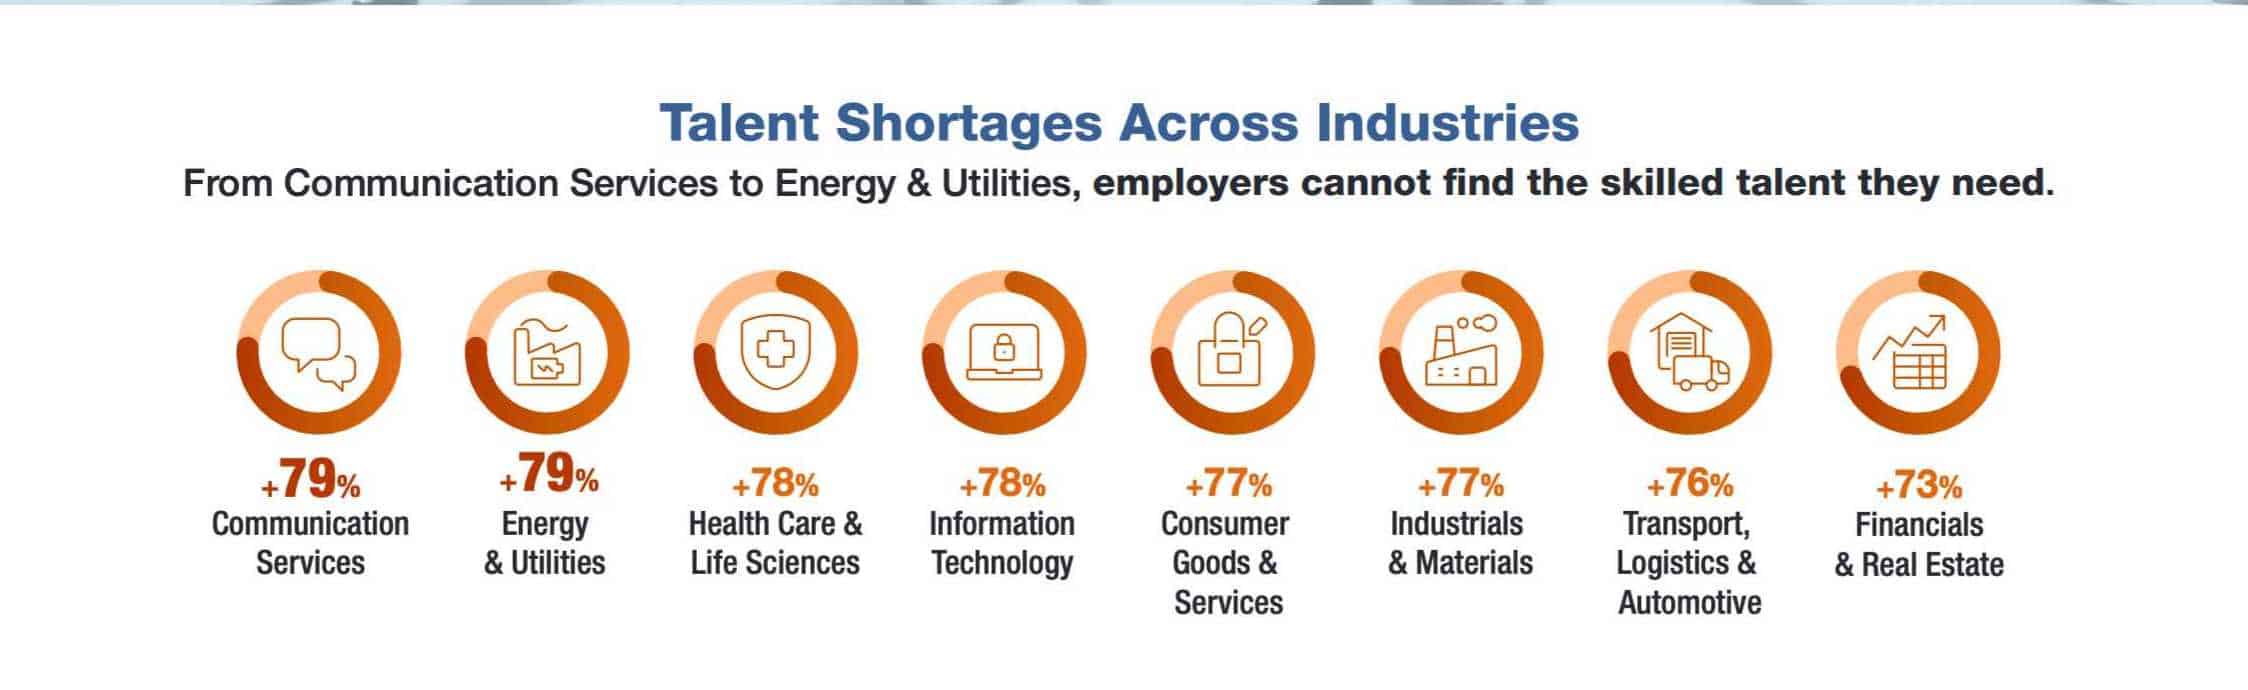 Talent shortage hits all types of different industries - not just high-tech and knowledge-intensive industries.